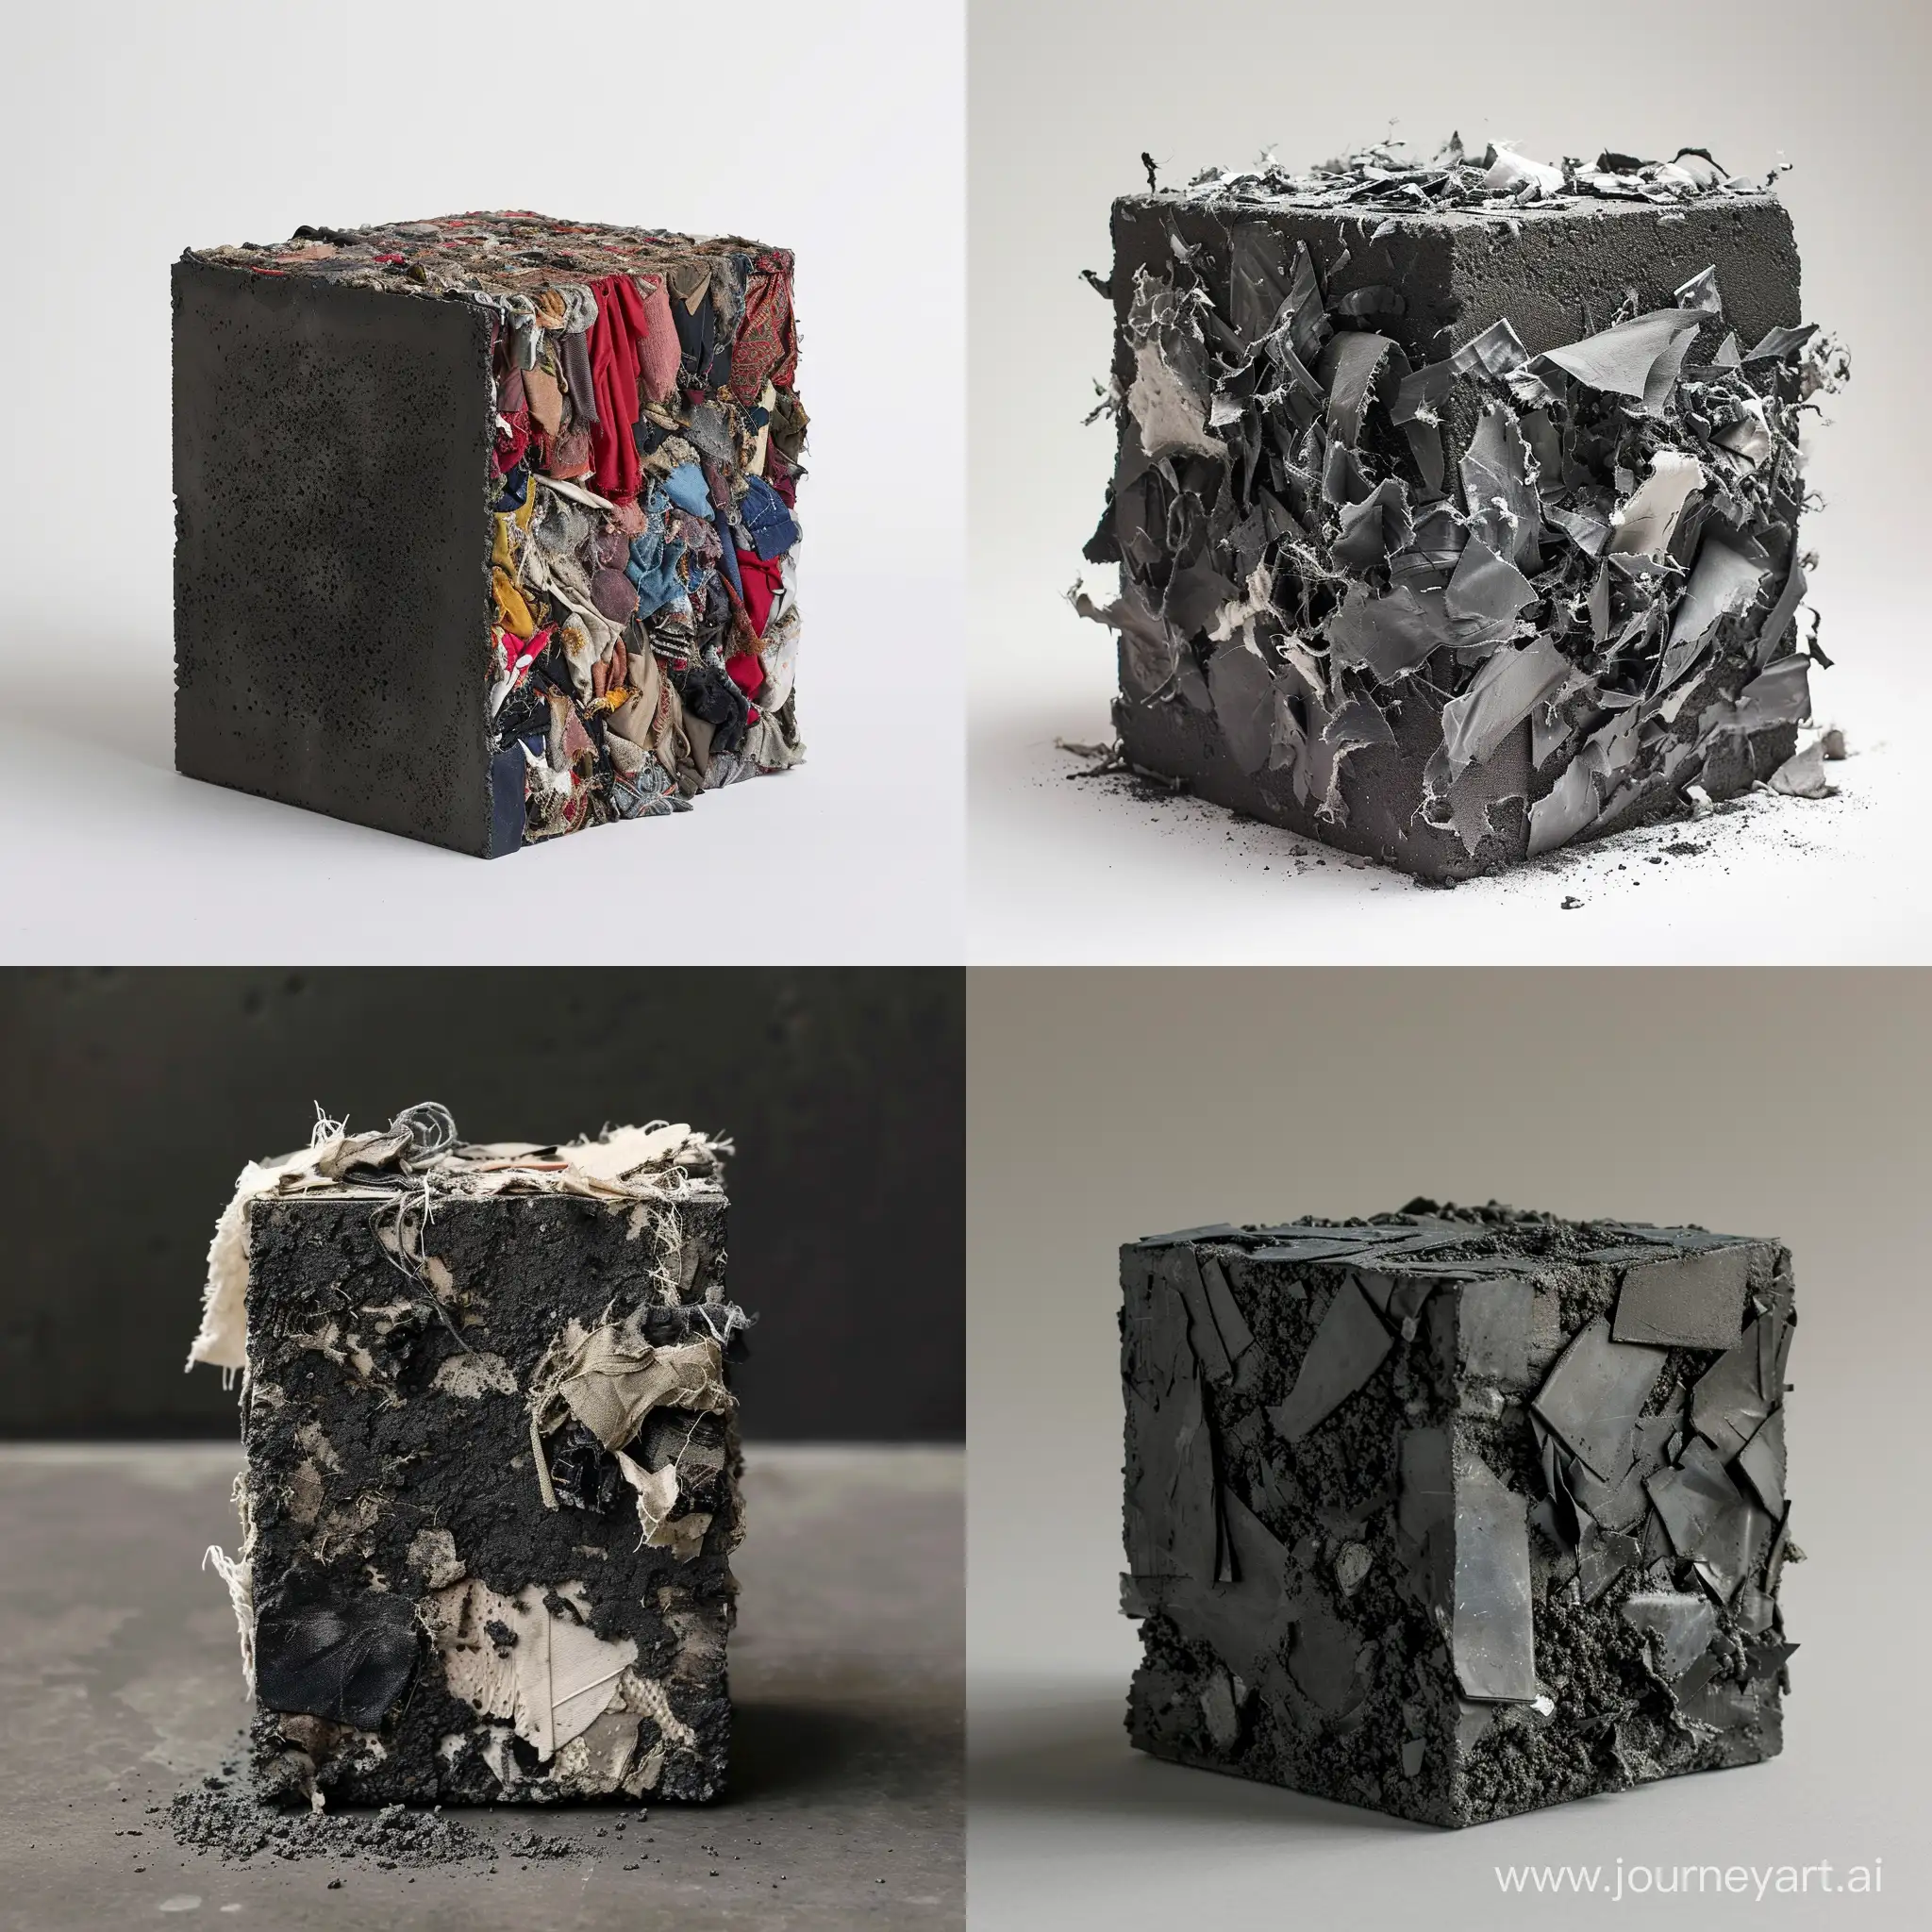 create on esingle block made out of clothes/textiles and dark concrete. I want the materials to be combined together where the clothes are pulverized in really small particles ass small as a snowflake